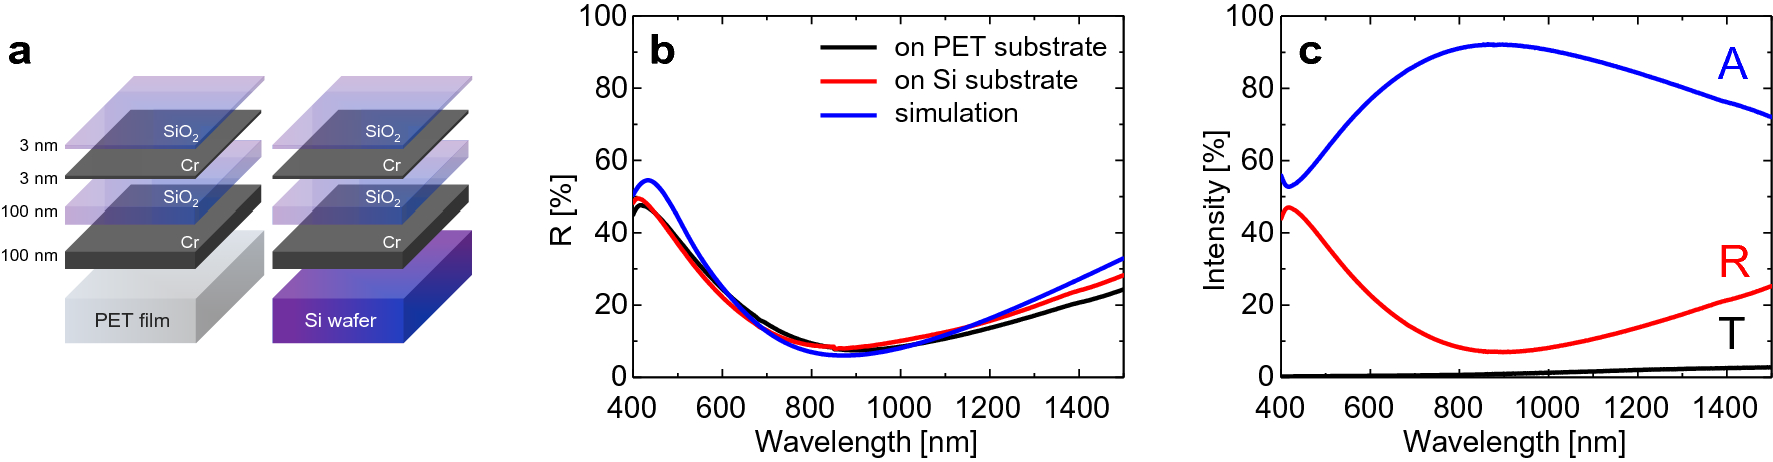 High-temperature differences in plasmonic broadband absorber on PET and Si  substrates | Scientific Reports